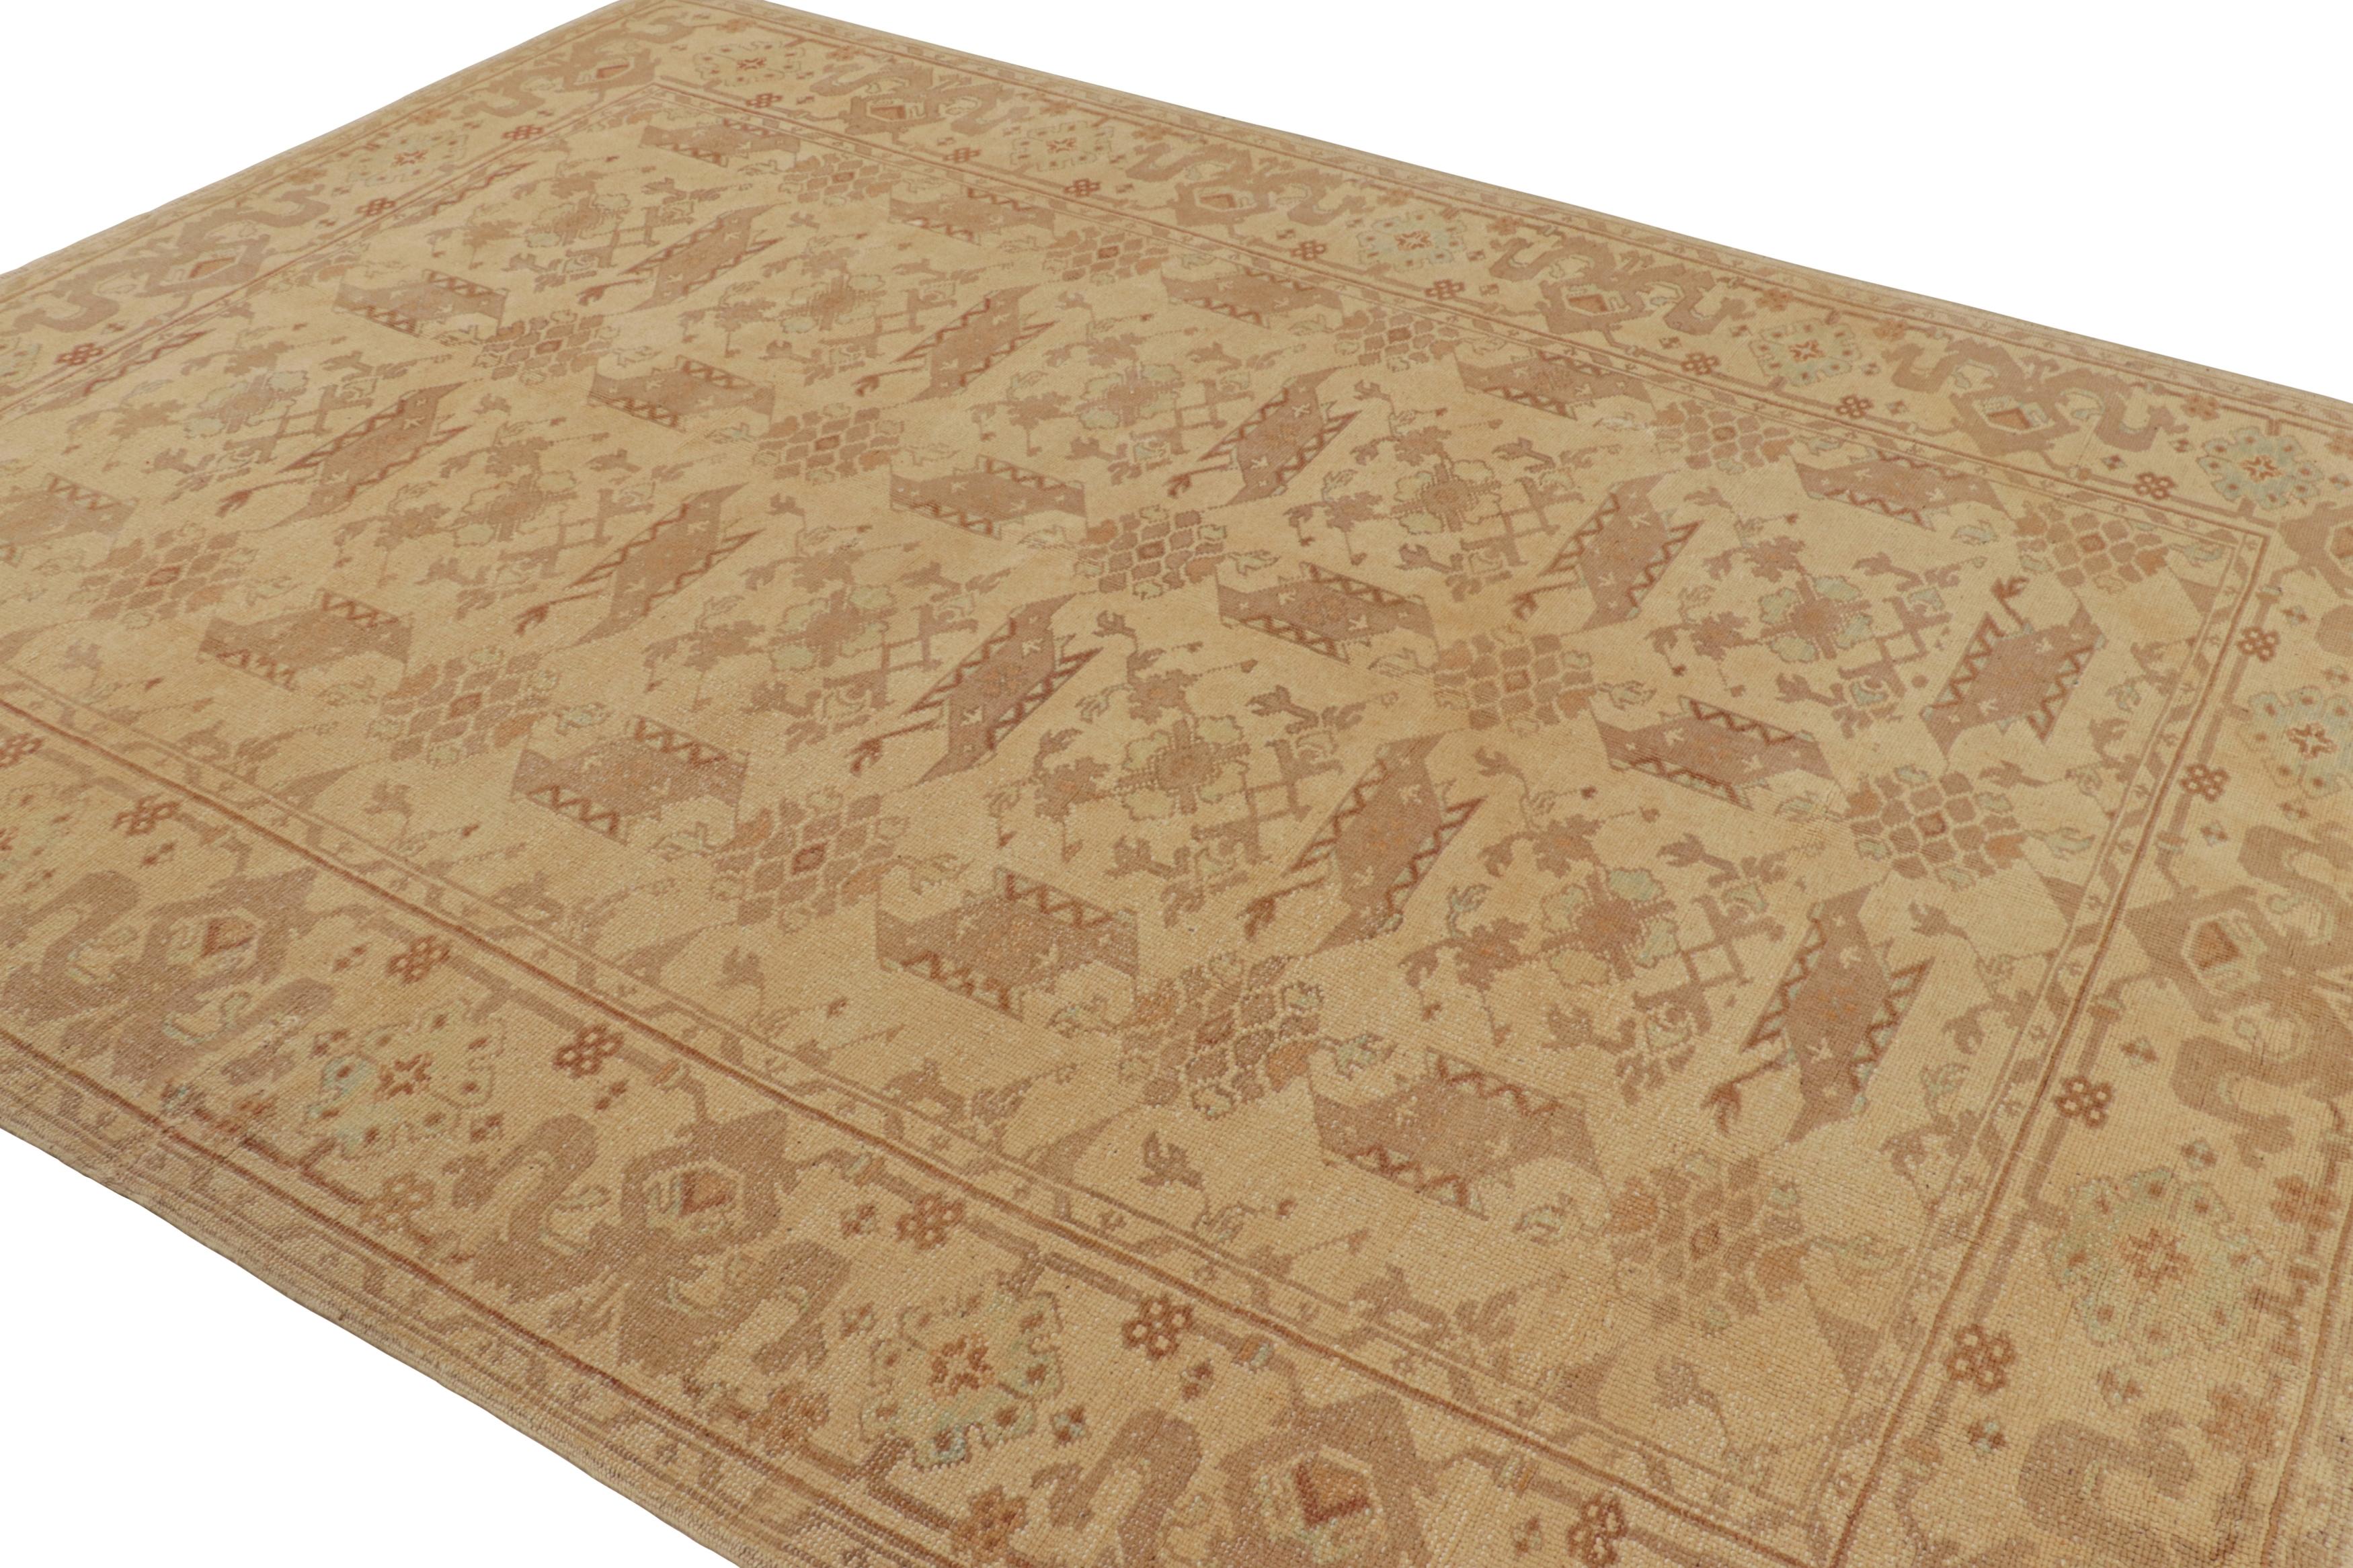 Vintage Turkish Oushak Rug Beige-Brown, Red Floral Pattern by Rug & Kilim In Good Condition For Sale In Long Island City, NY